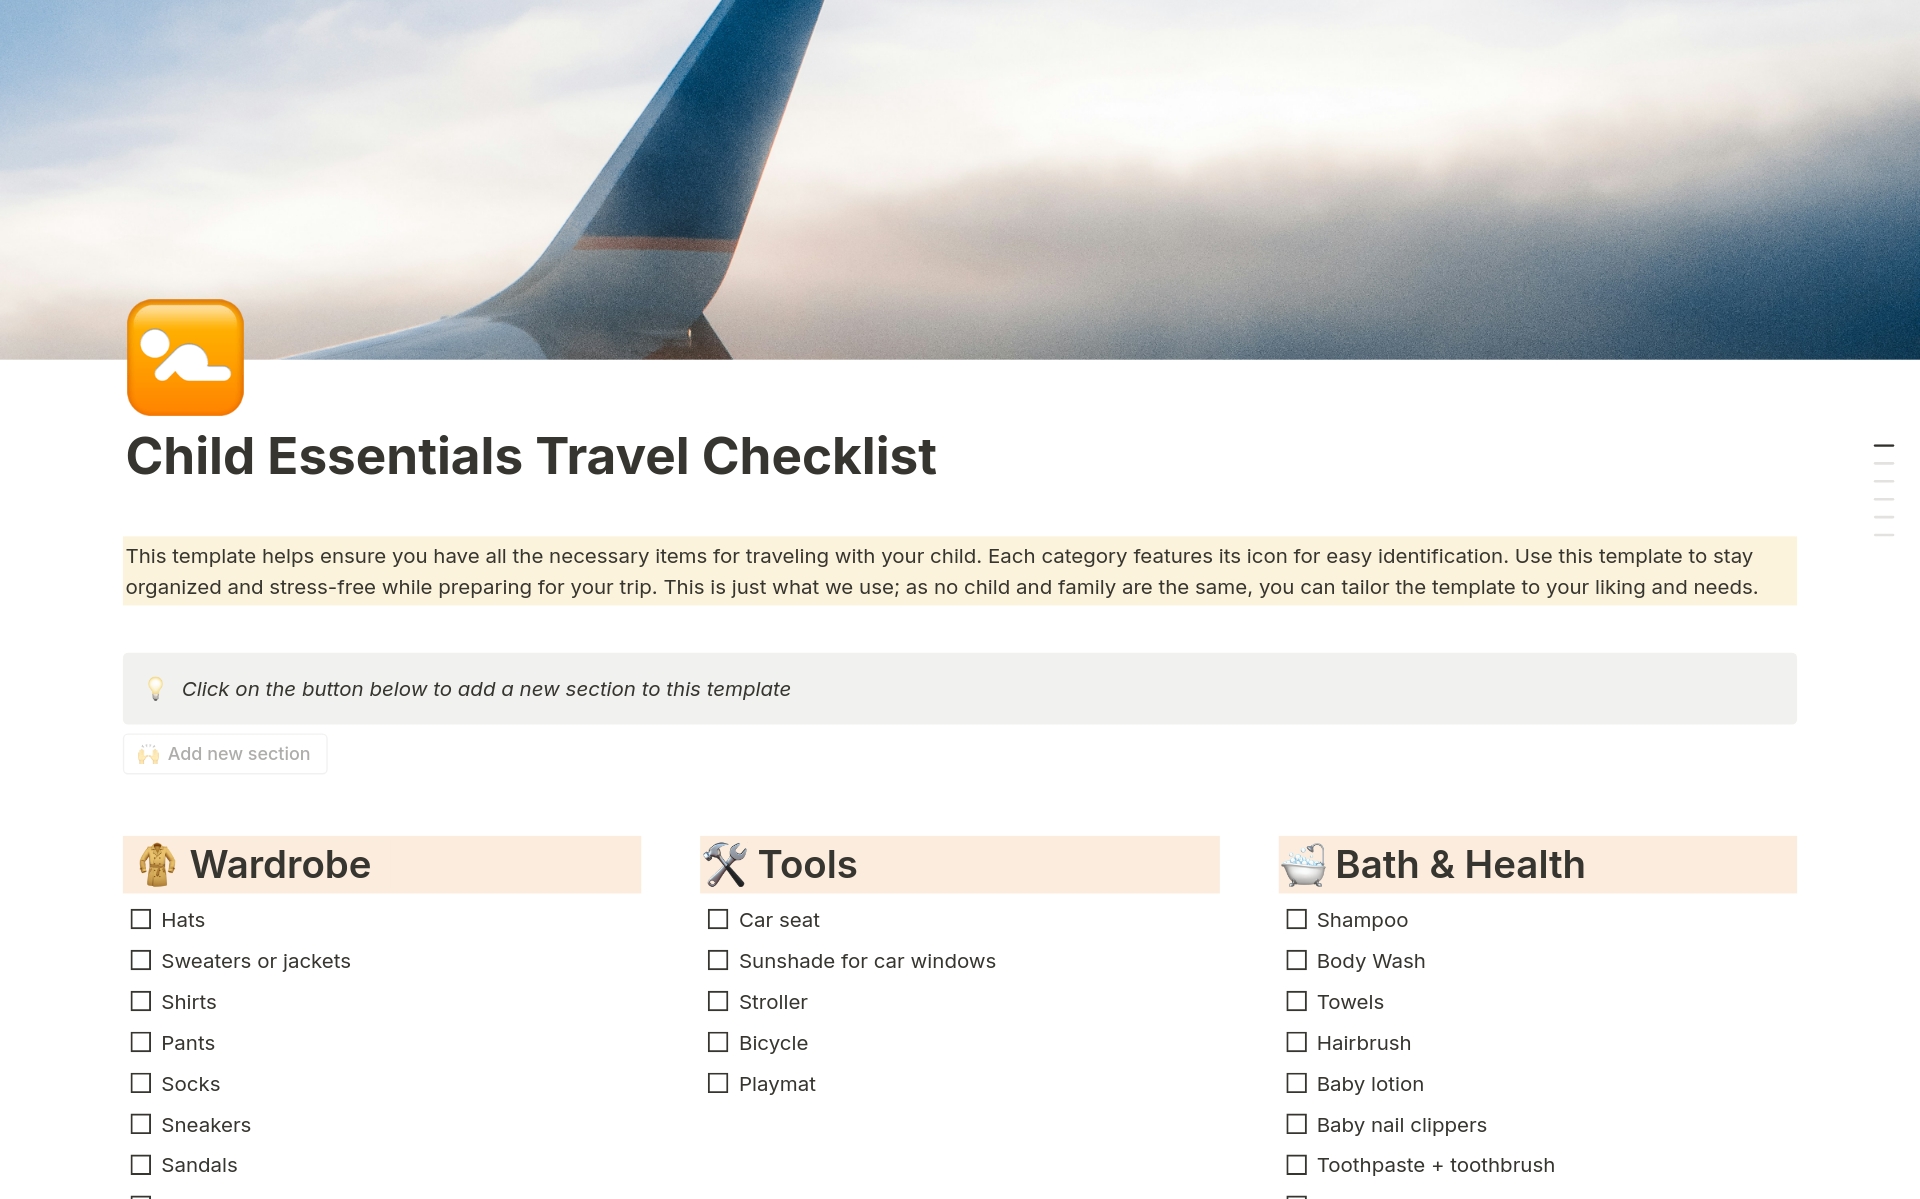 Use this template to stay organized and stress-free while preparing for a trip with your child.